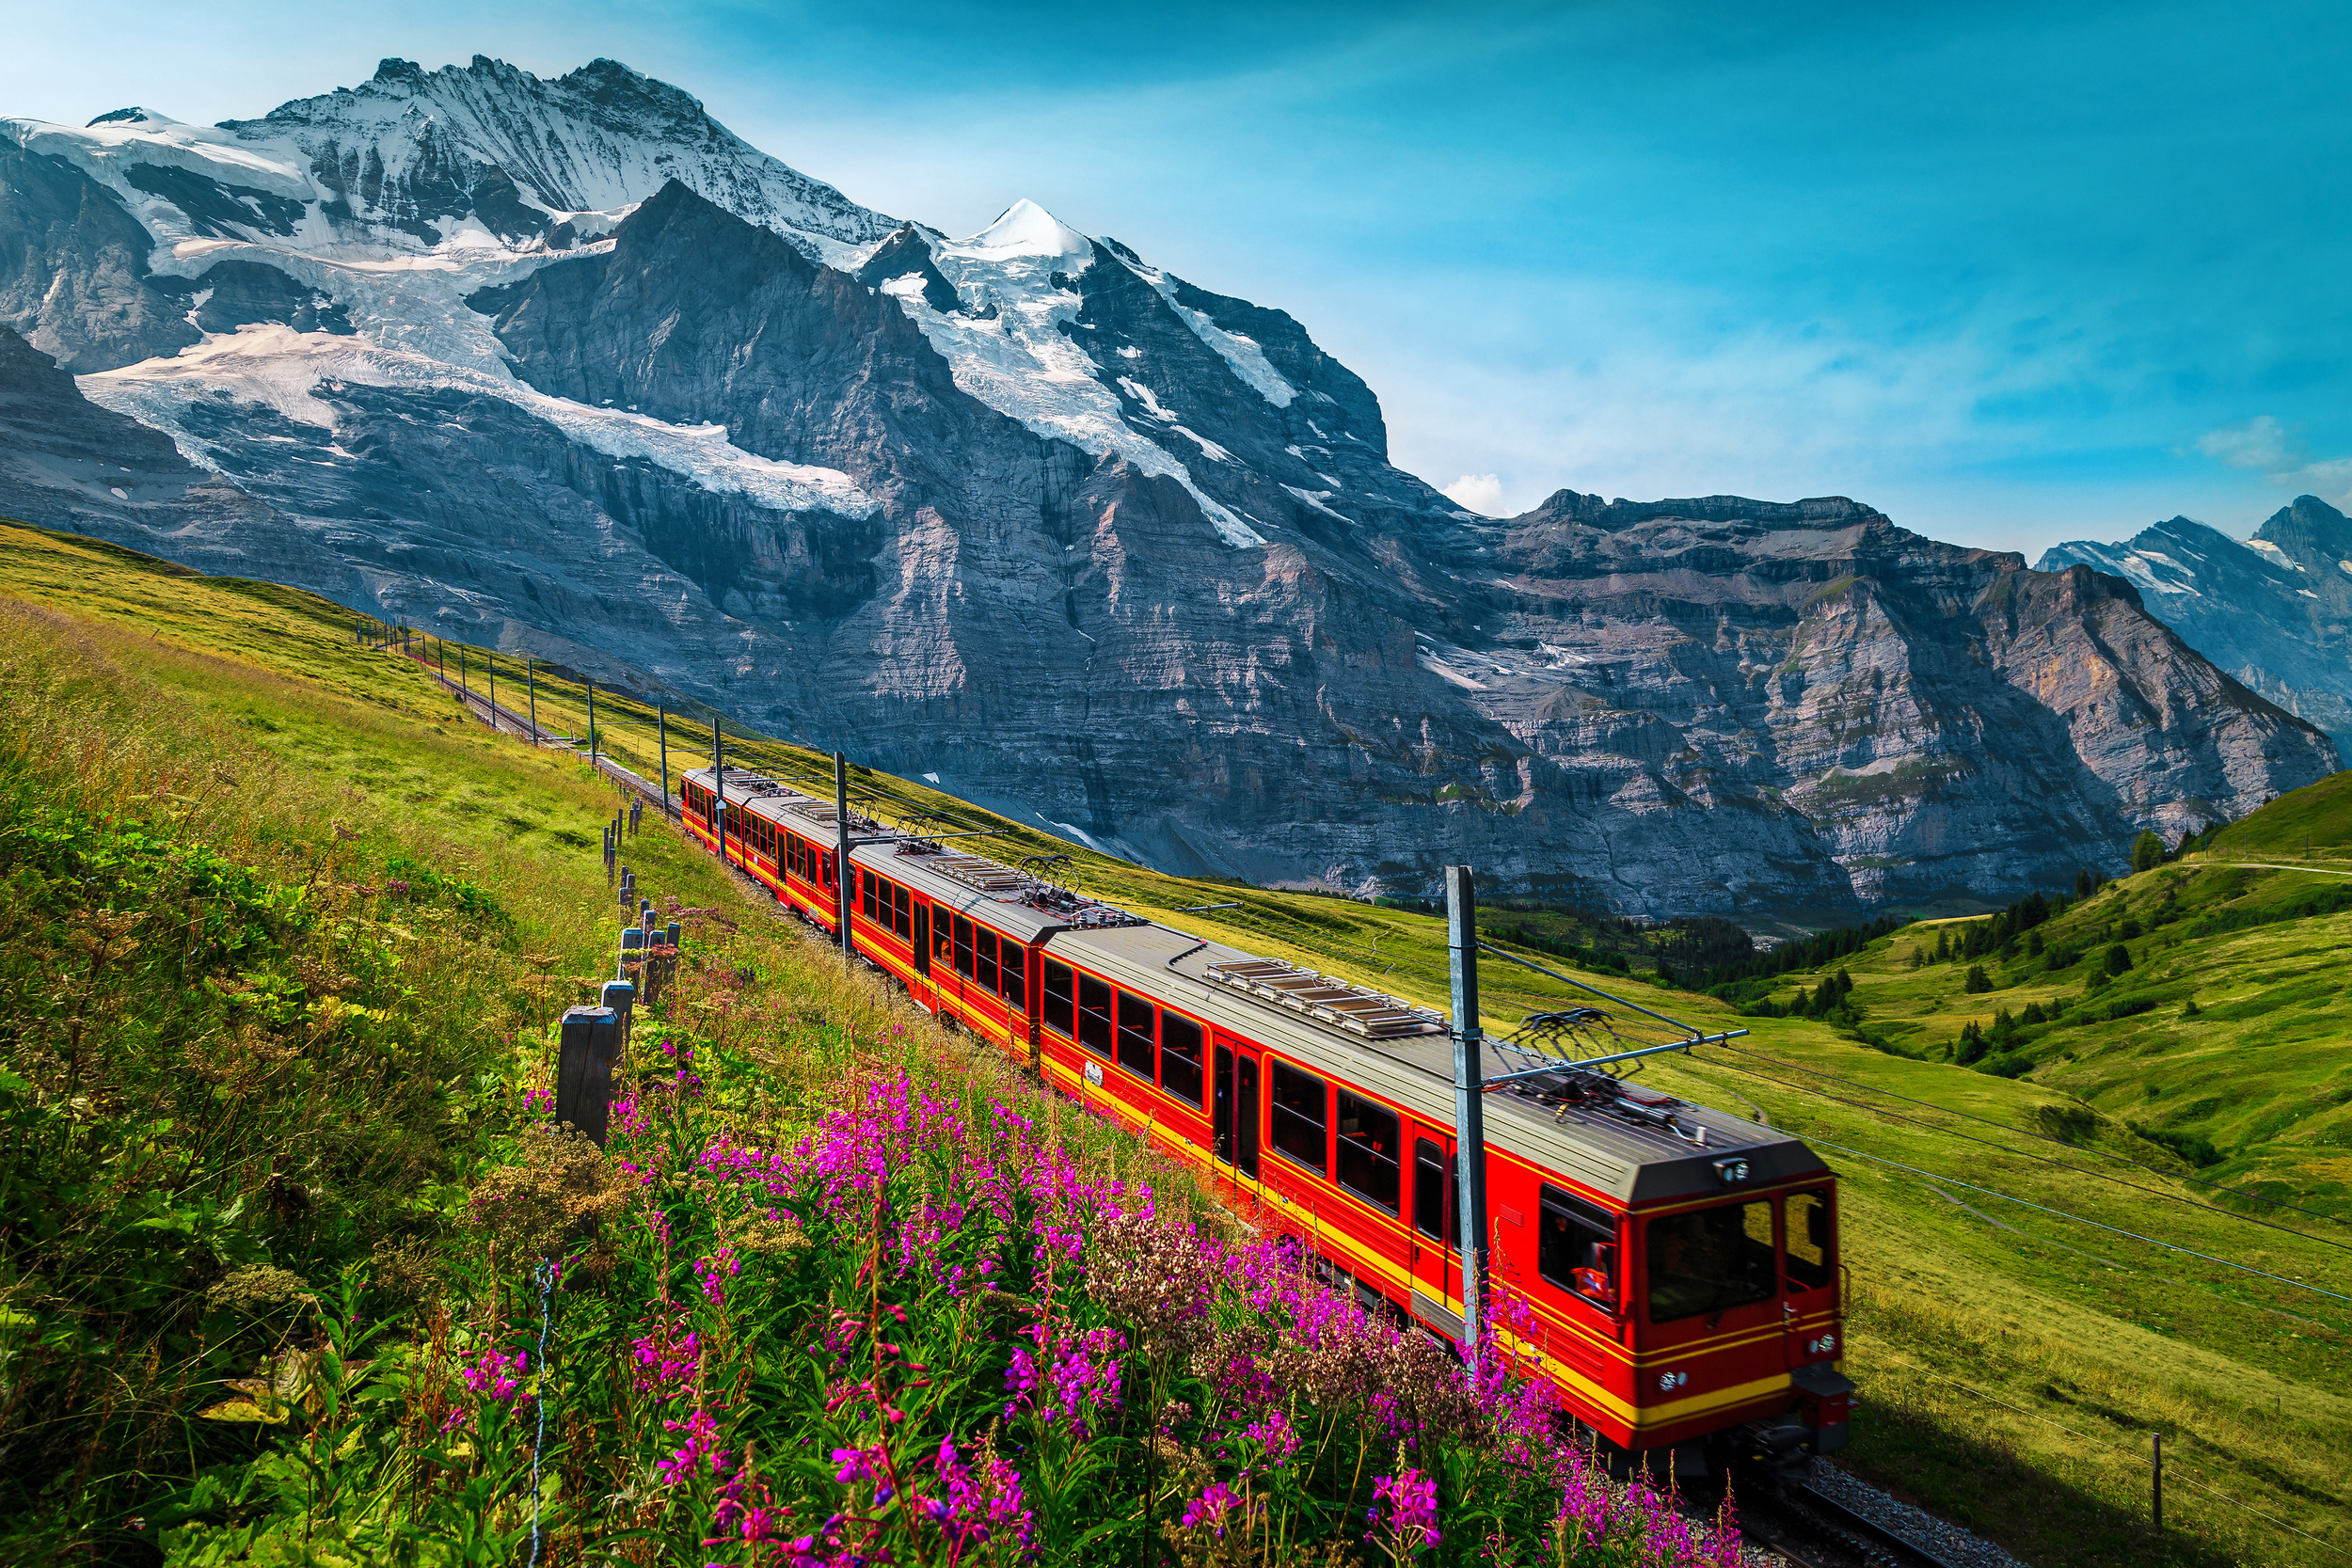 <p>This isn’t a standard commuter rail between two domestic cities; it’s an experience. The two-hour ride will take passengers through the lovely Swiss countryside. Before departing, you’ll see alpine blue lakes, cascading waterfalls, and quaint mountain villages.</p><p>You may also like: <a href='https://www.yardbarker.com/lifestyle/articles/our_20_favorite_road_trip_snacks/s1__35553395'>Our 20 favorite road trip snacks</a></p>